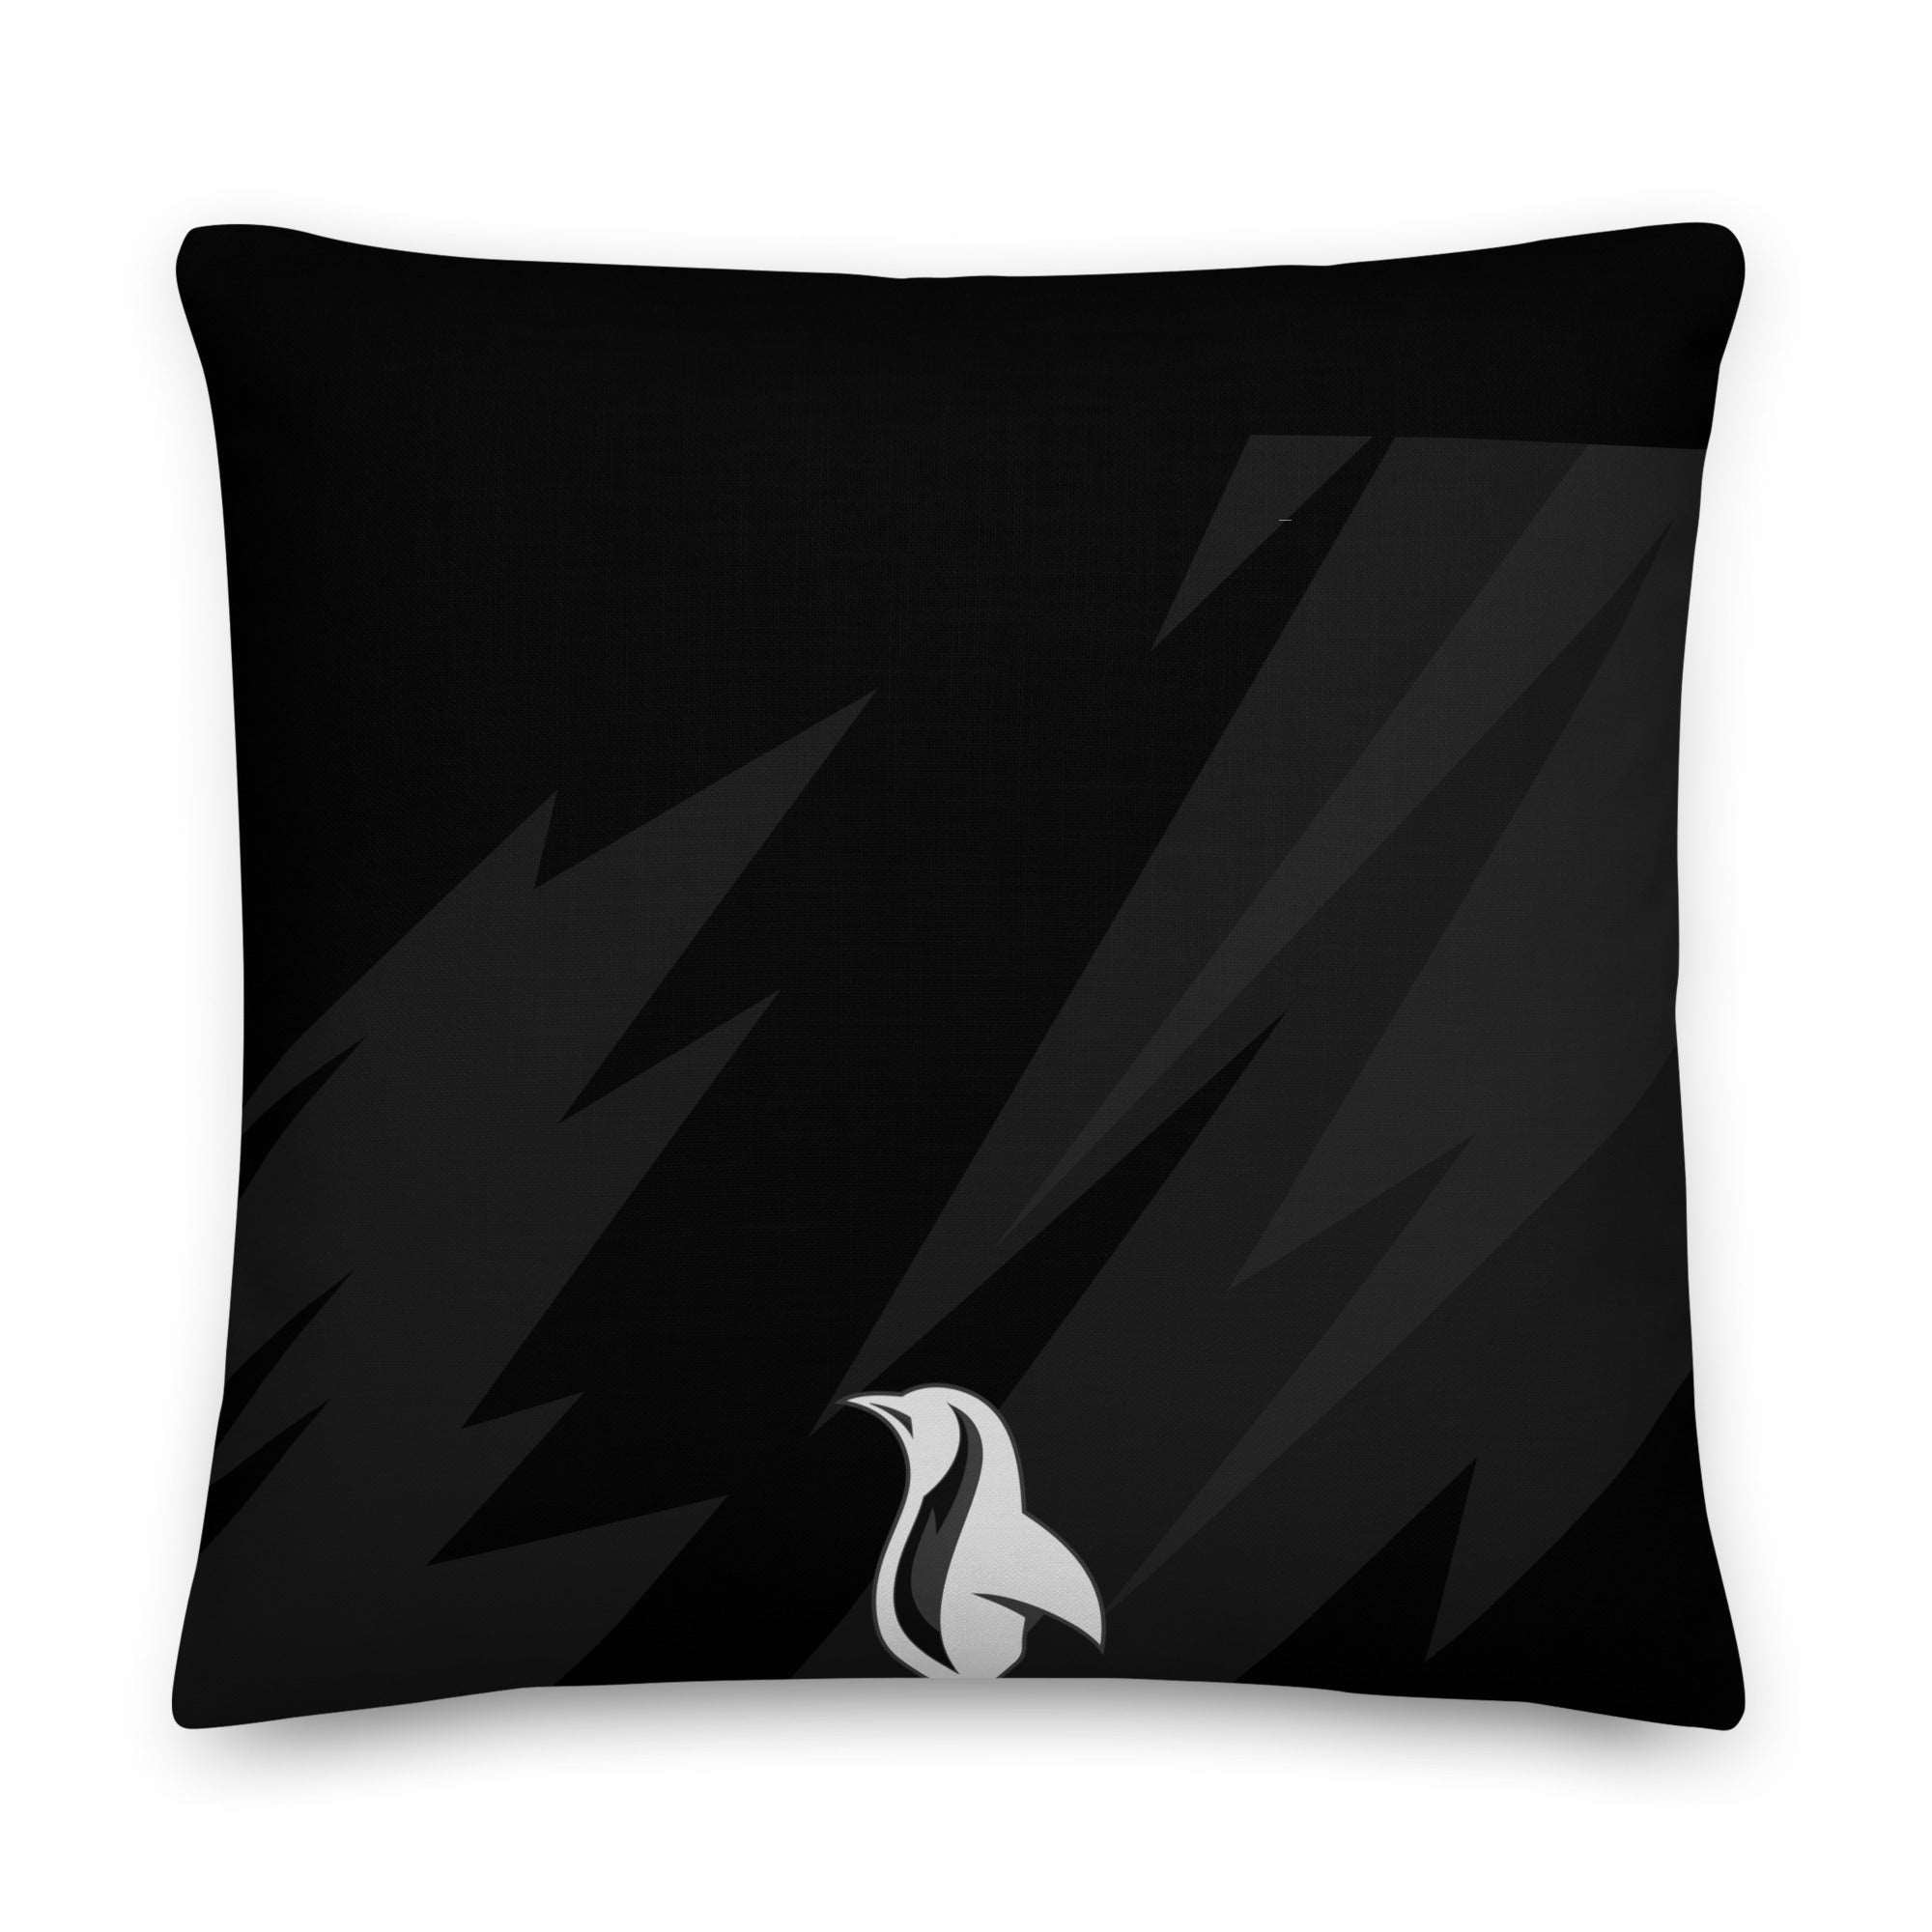 Black pillow with a Bat and baseball